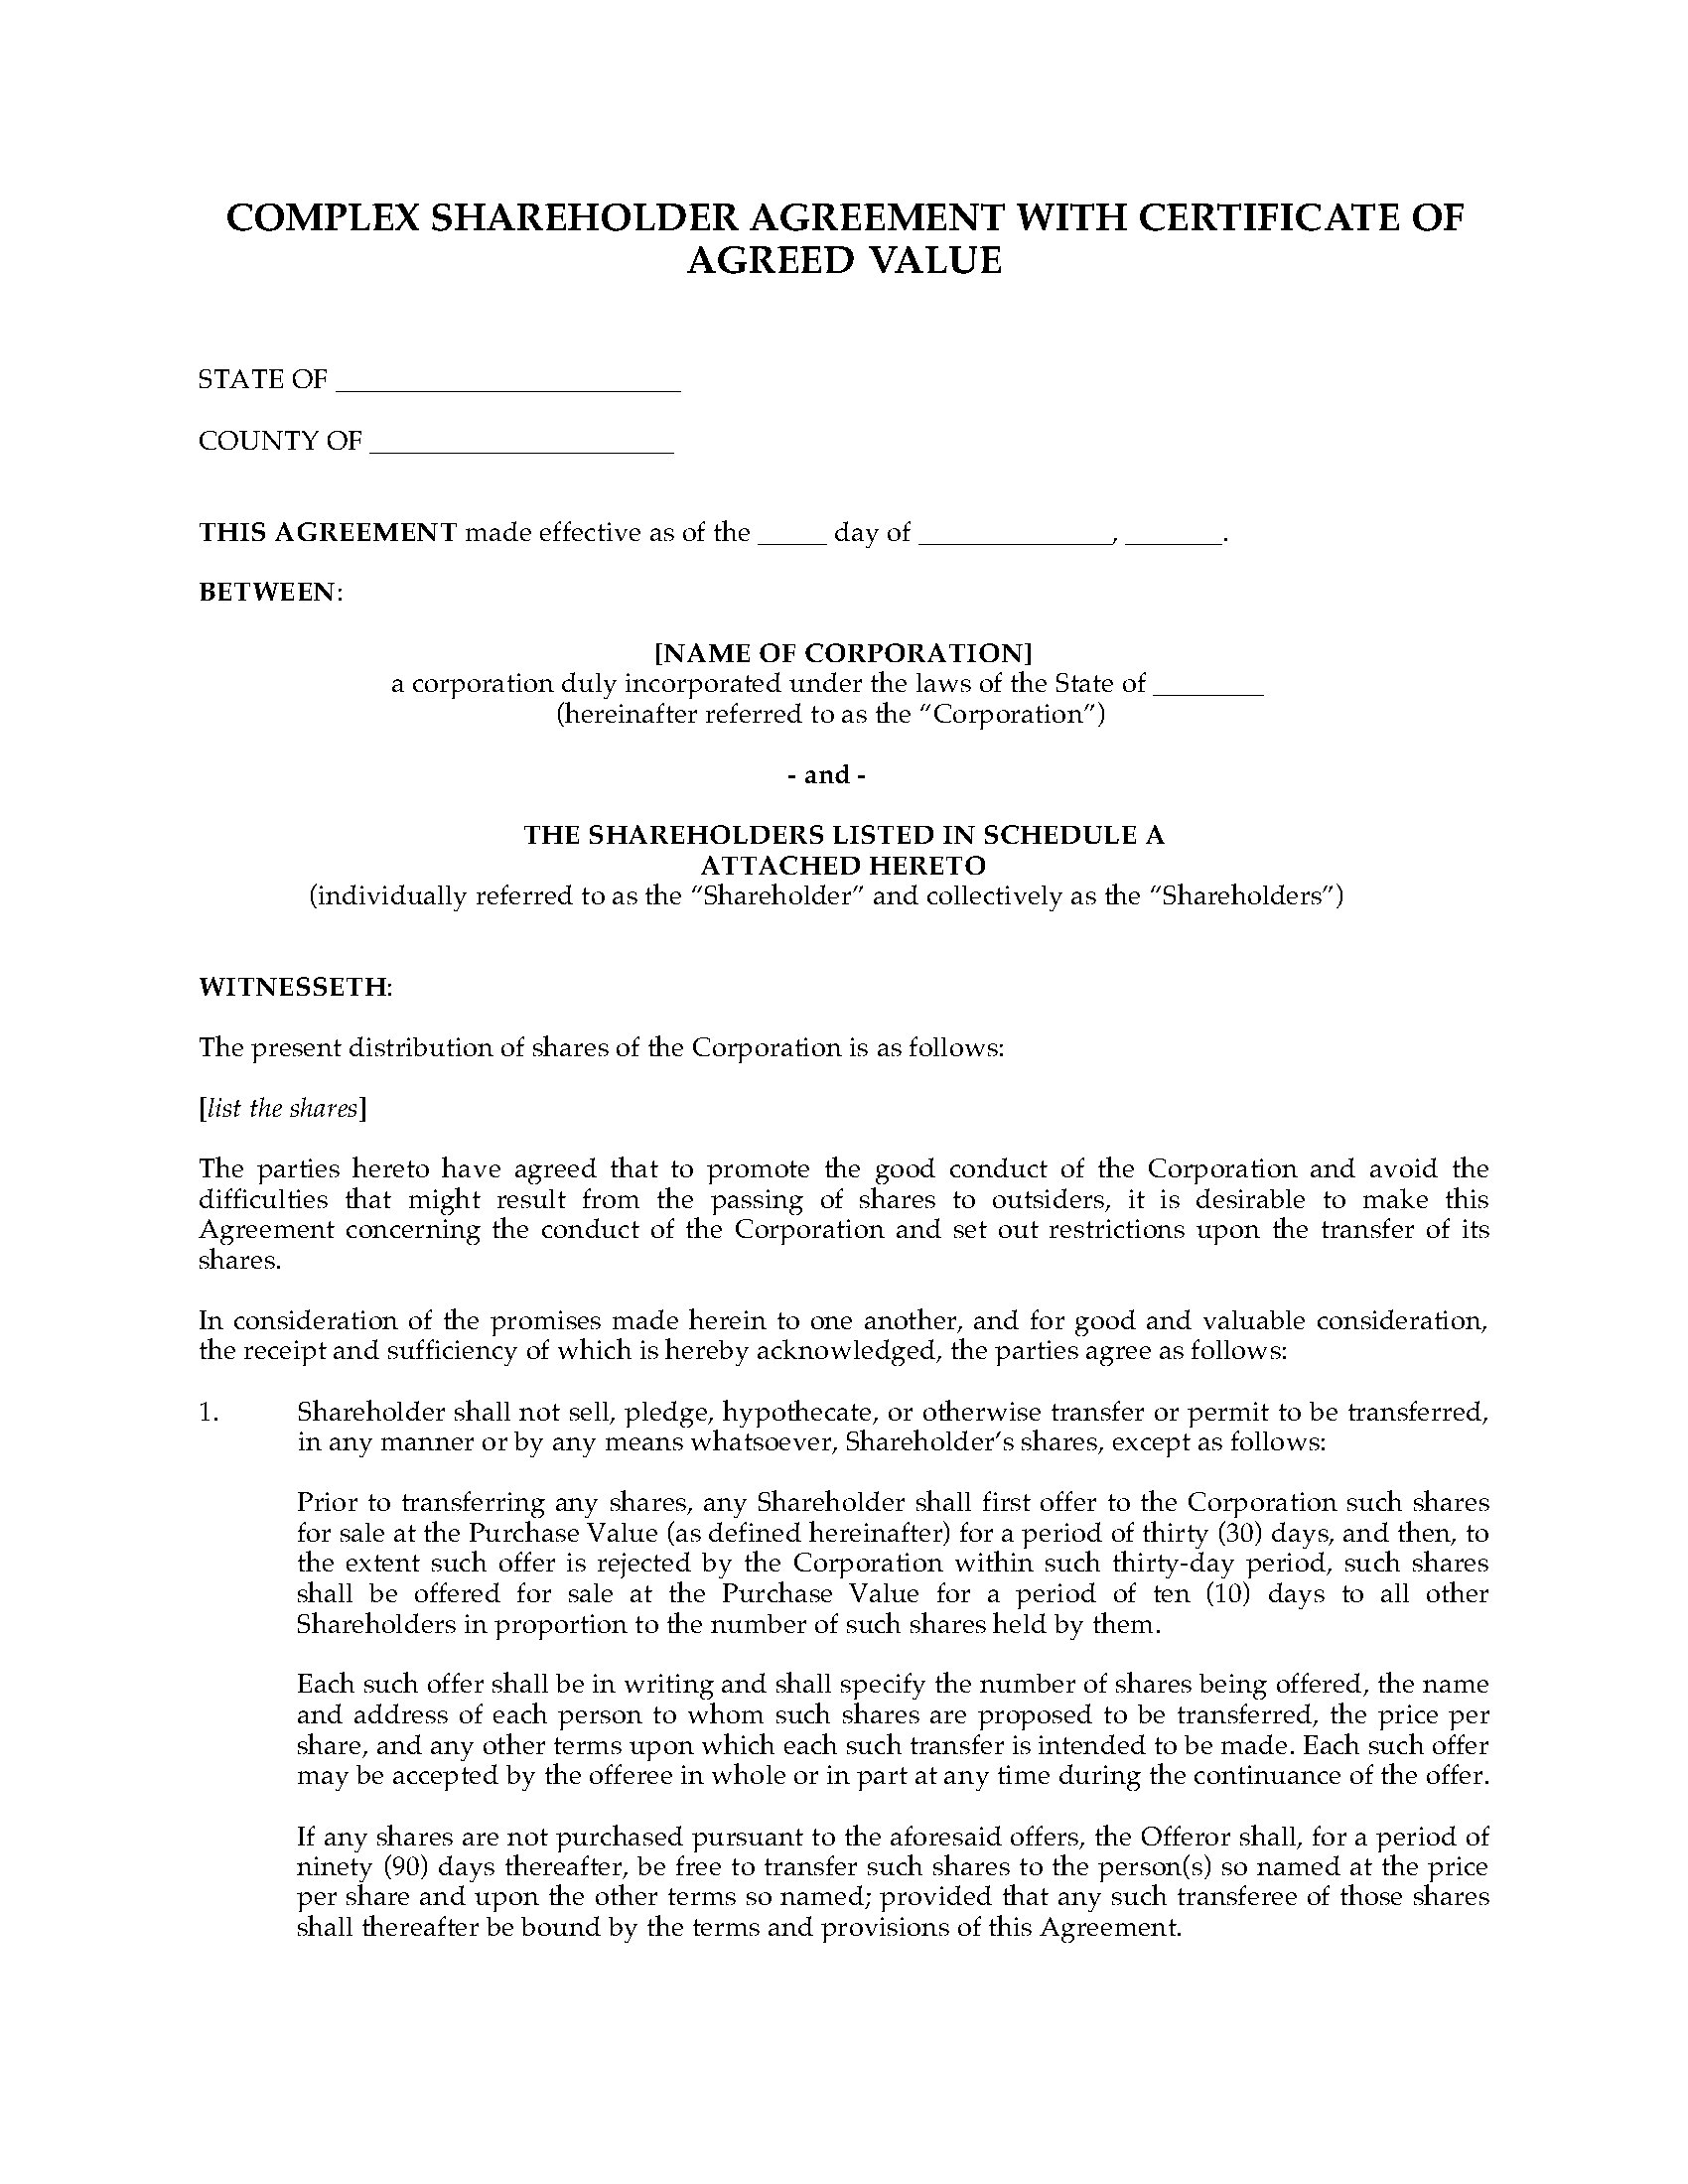 USA Shareholder Agreement with Certificate of Agreed Value  Legal Within s corp shareholder agreement template